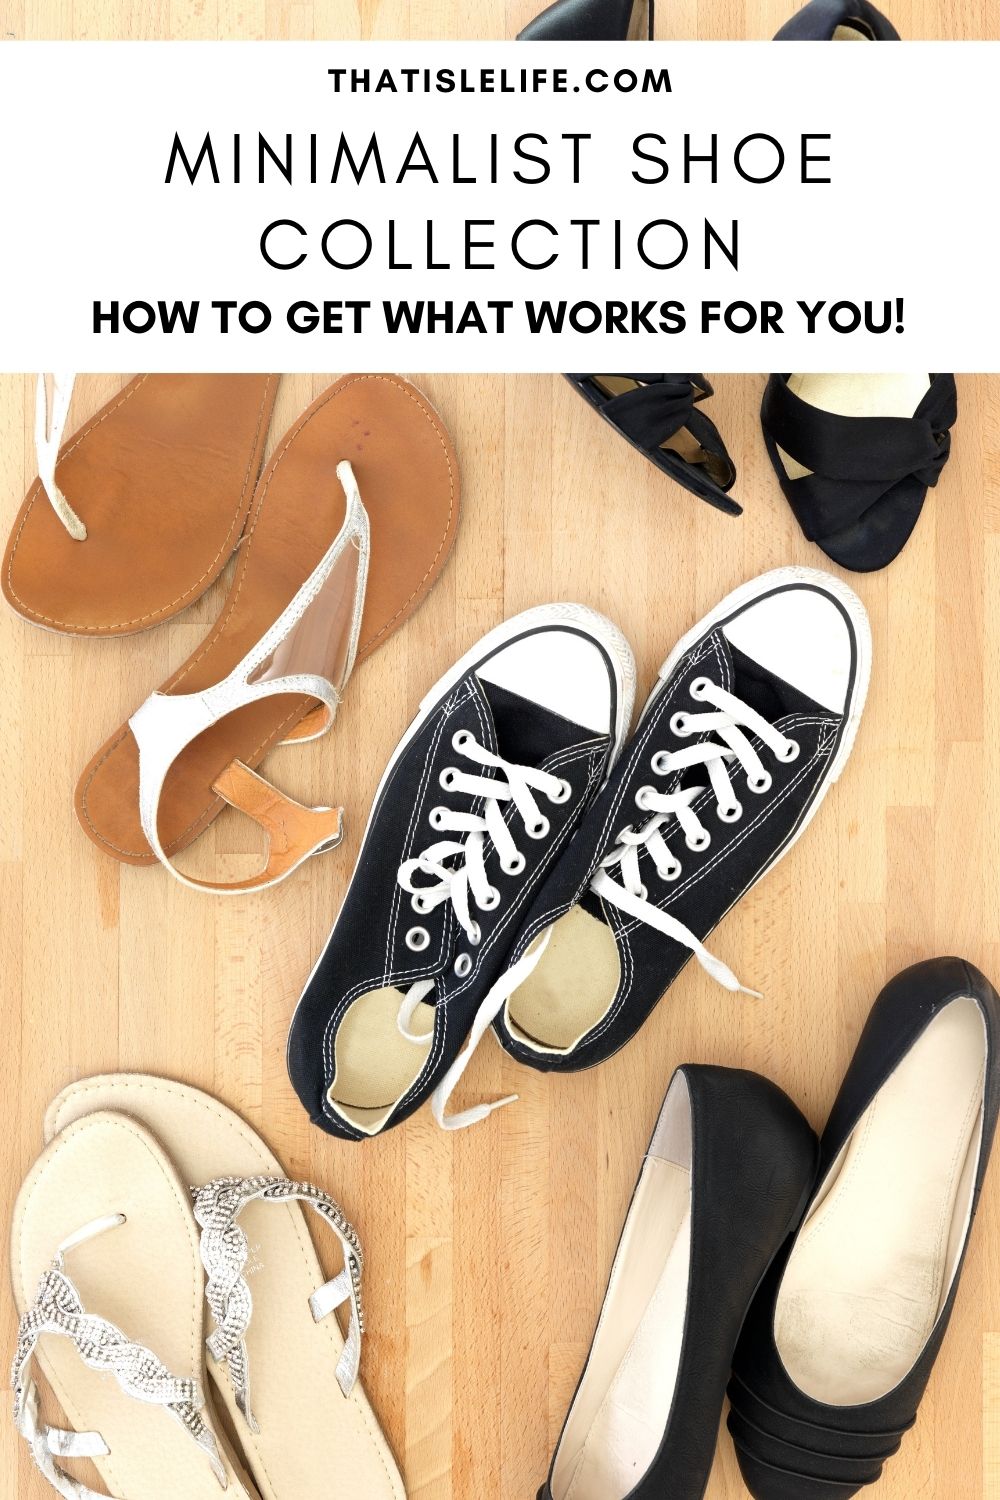 Minimalist Shoe Collection For Women - How To Get What Works For You